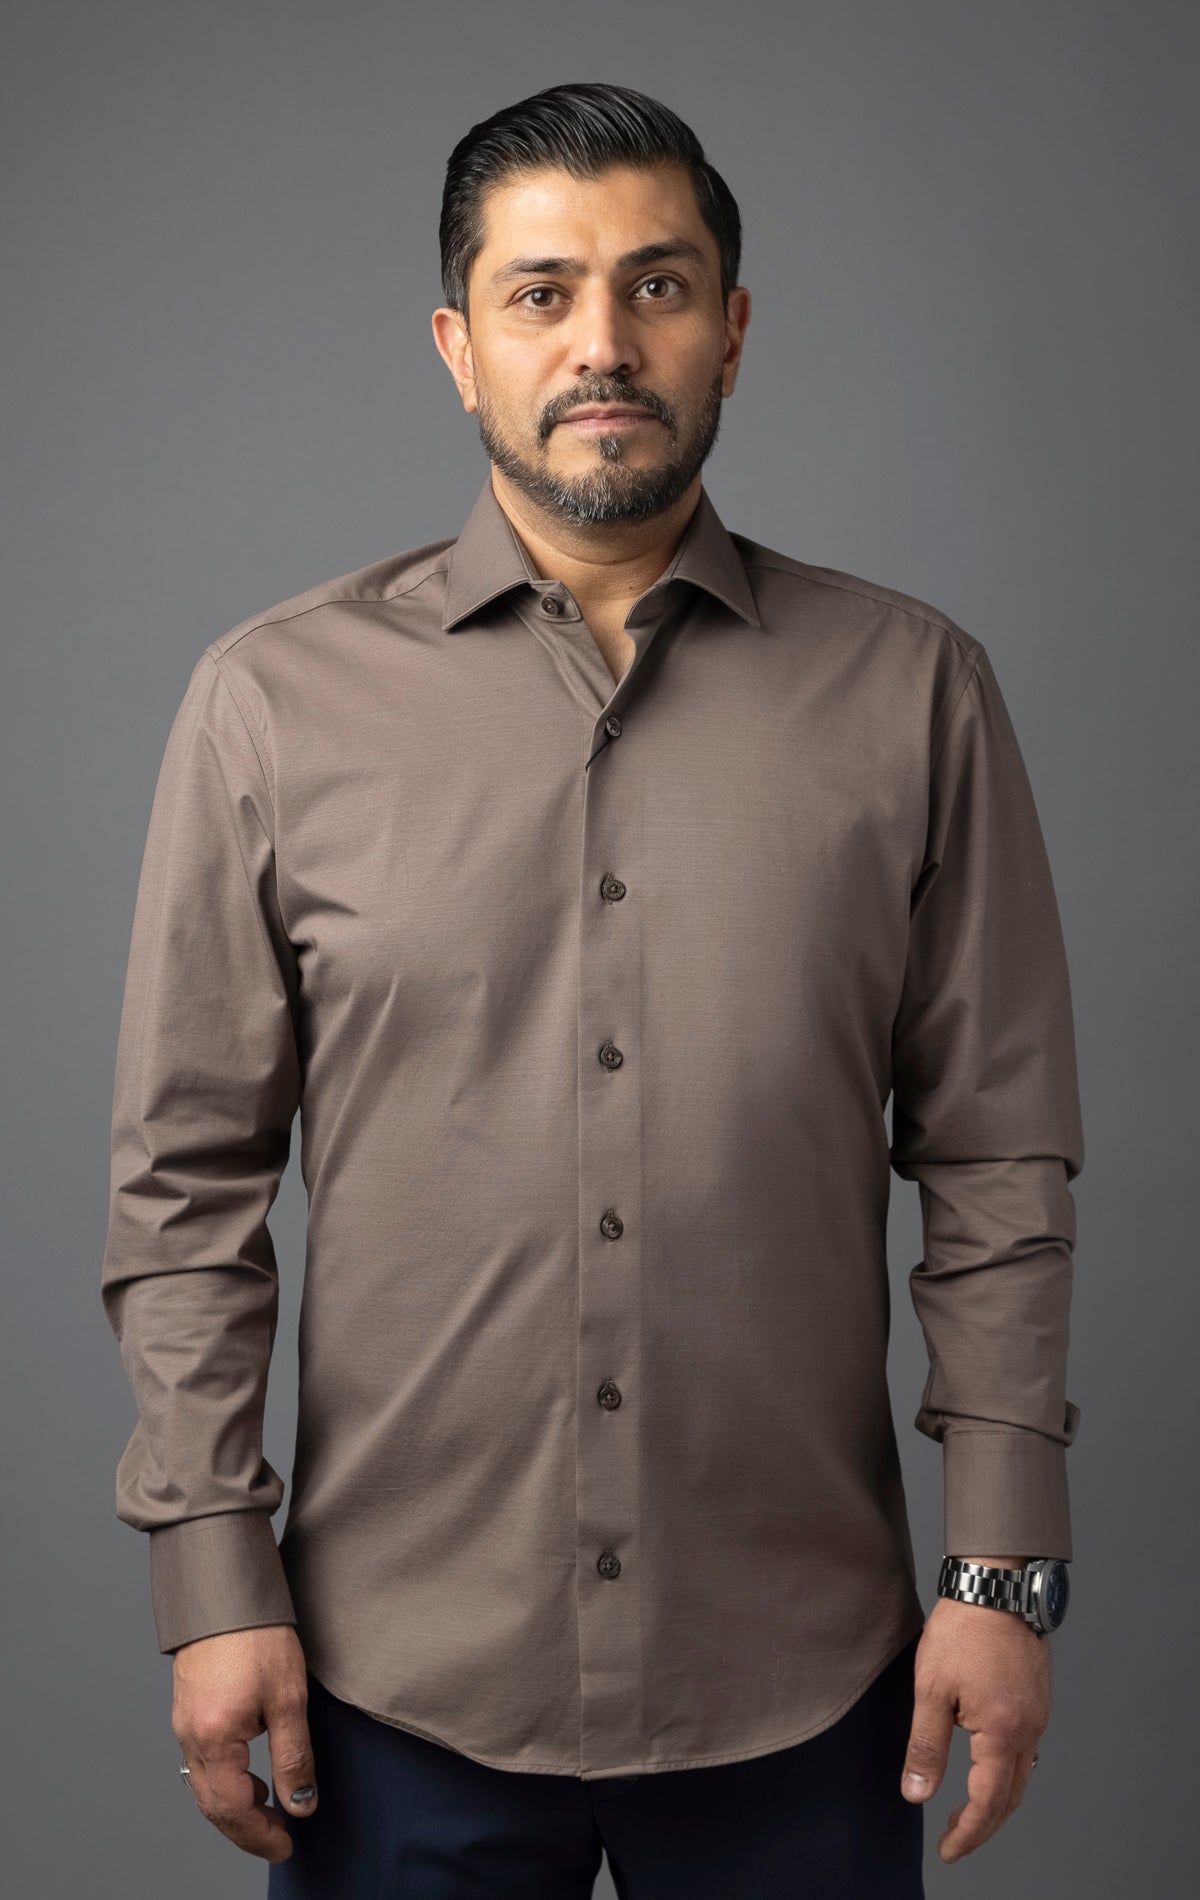 Men's long-sleeve formal shirt in a brown color. The shirt has a regular fit, point collar, and button fastening down the front.